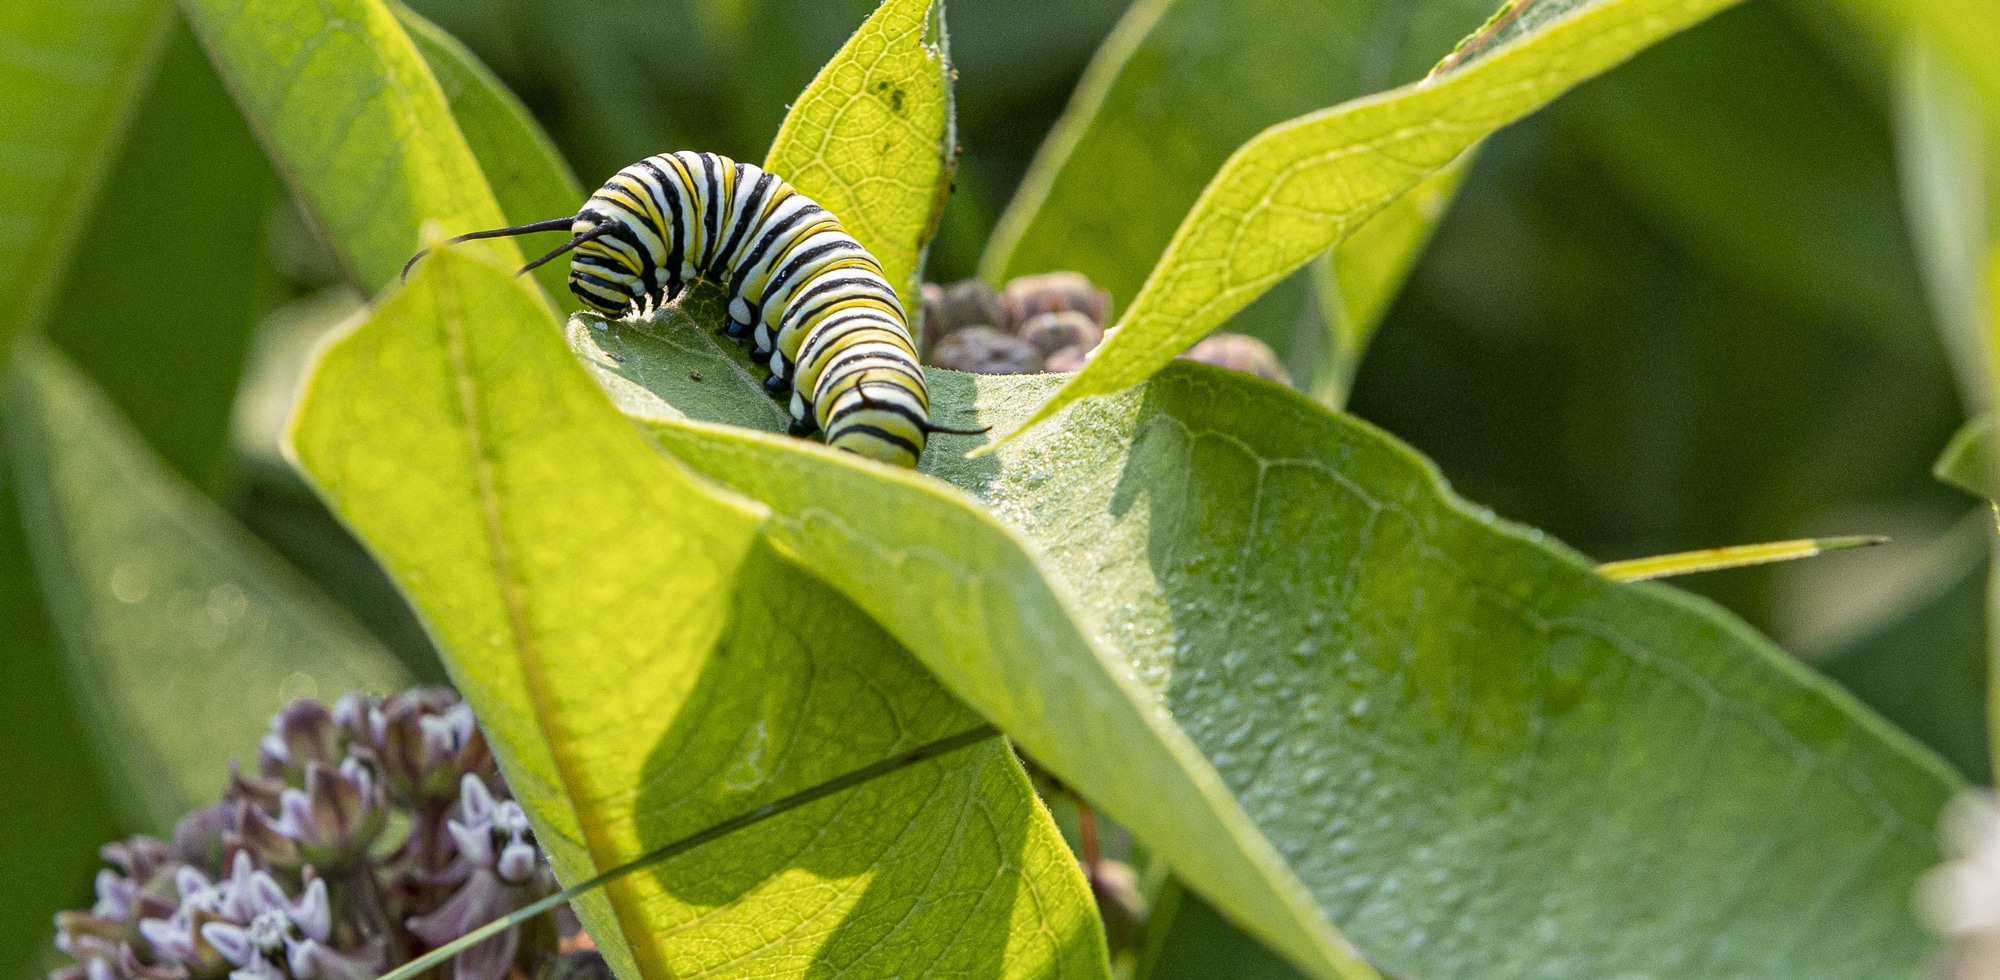 Scott's Lawn Care pest control services rid plants of bug and other harmful critters, such as caterpillars pictured in this image